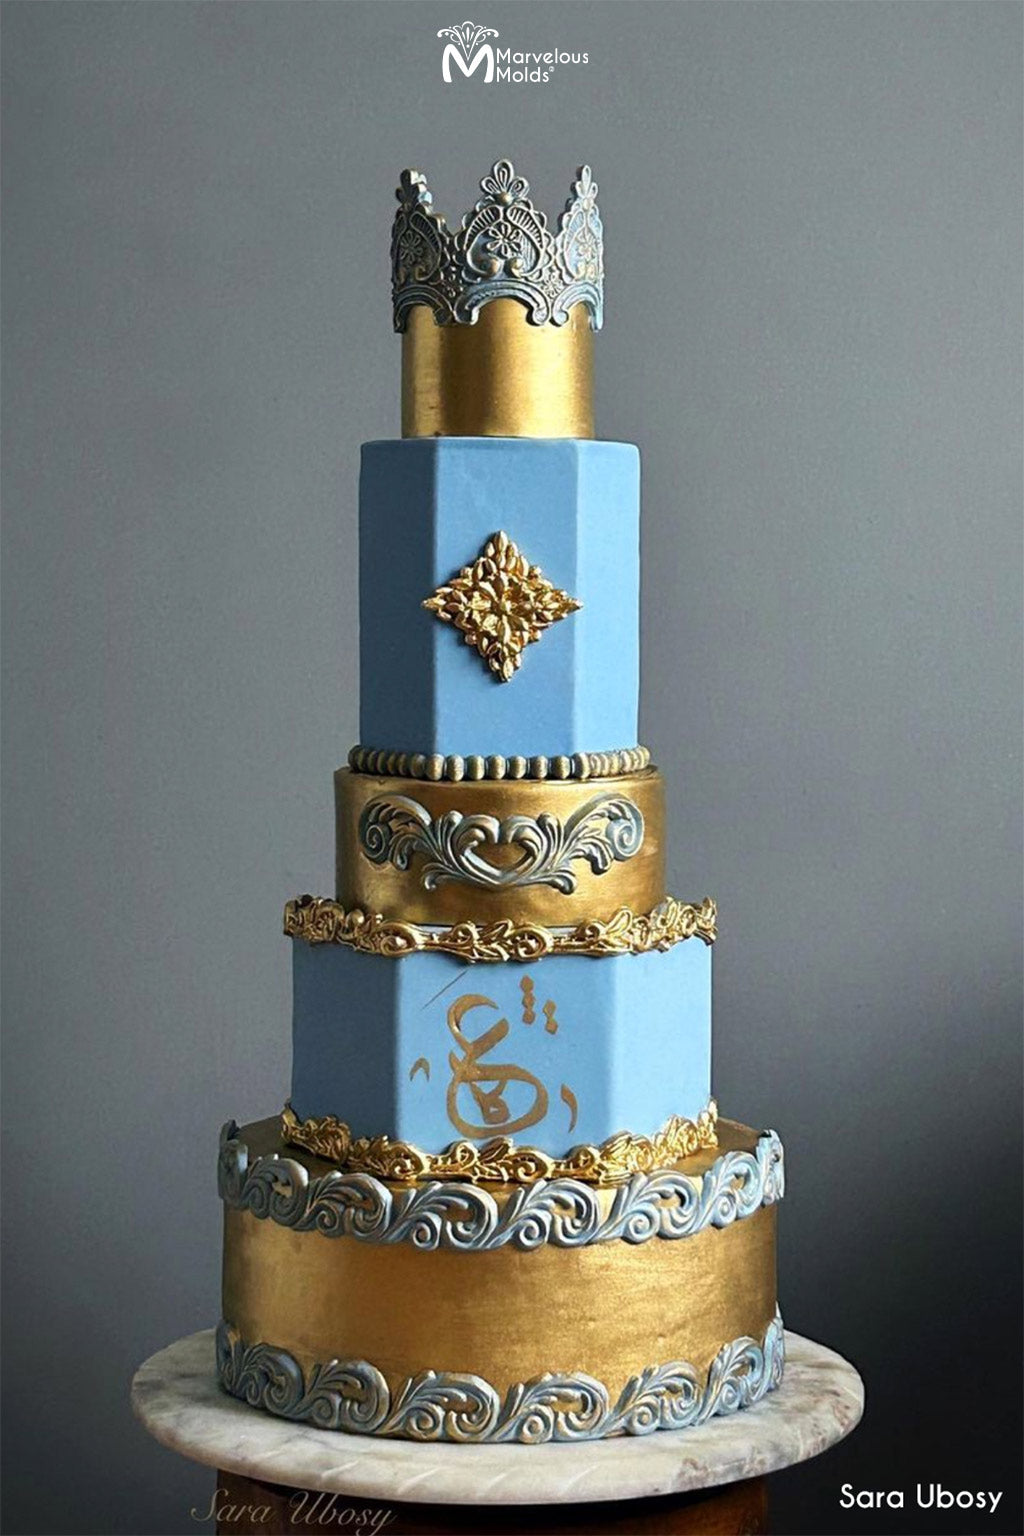 Blue and Gold Metallic Themed Cake with Lace Borders Created Using the Marvelous Molds Peggy Sue Lace Silicone Mold